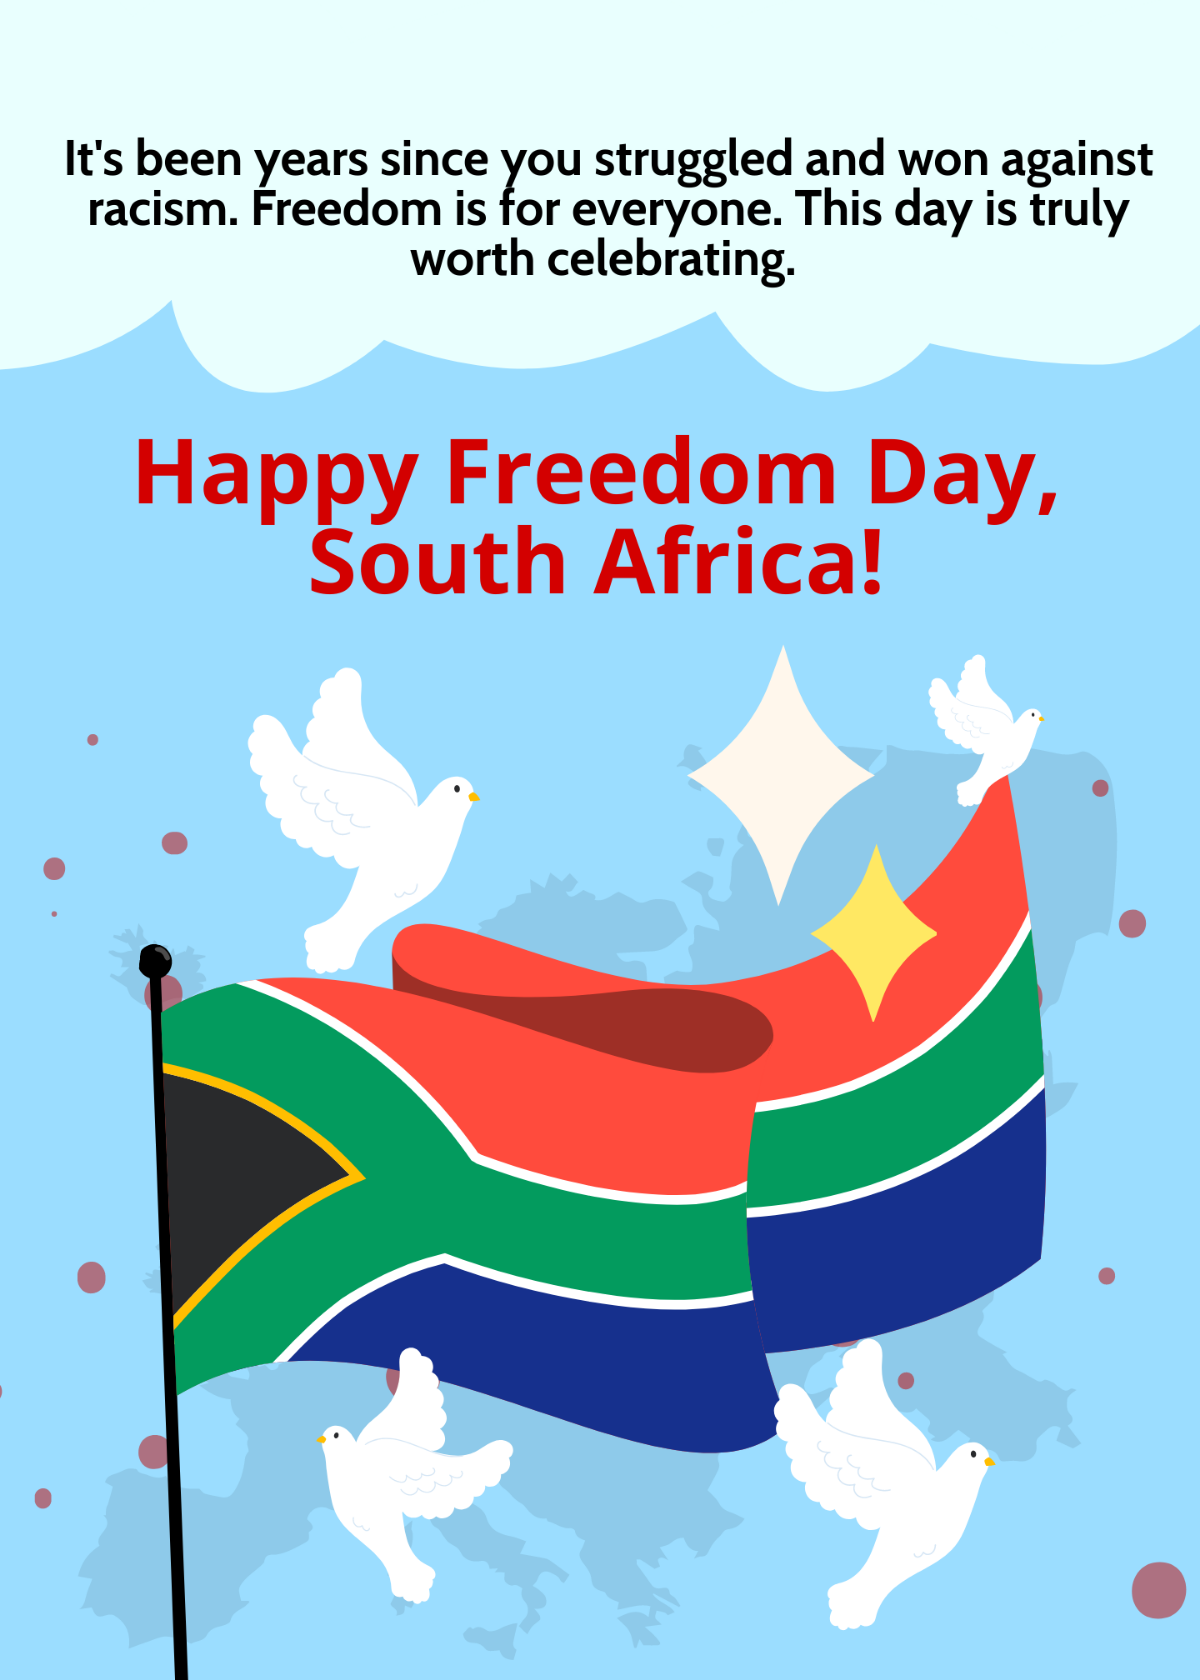 South Africa Freedom Day Message  Template